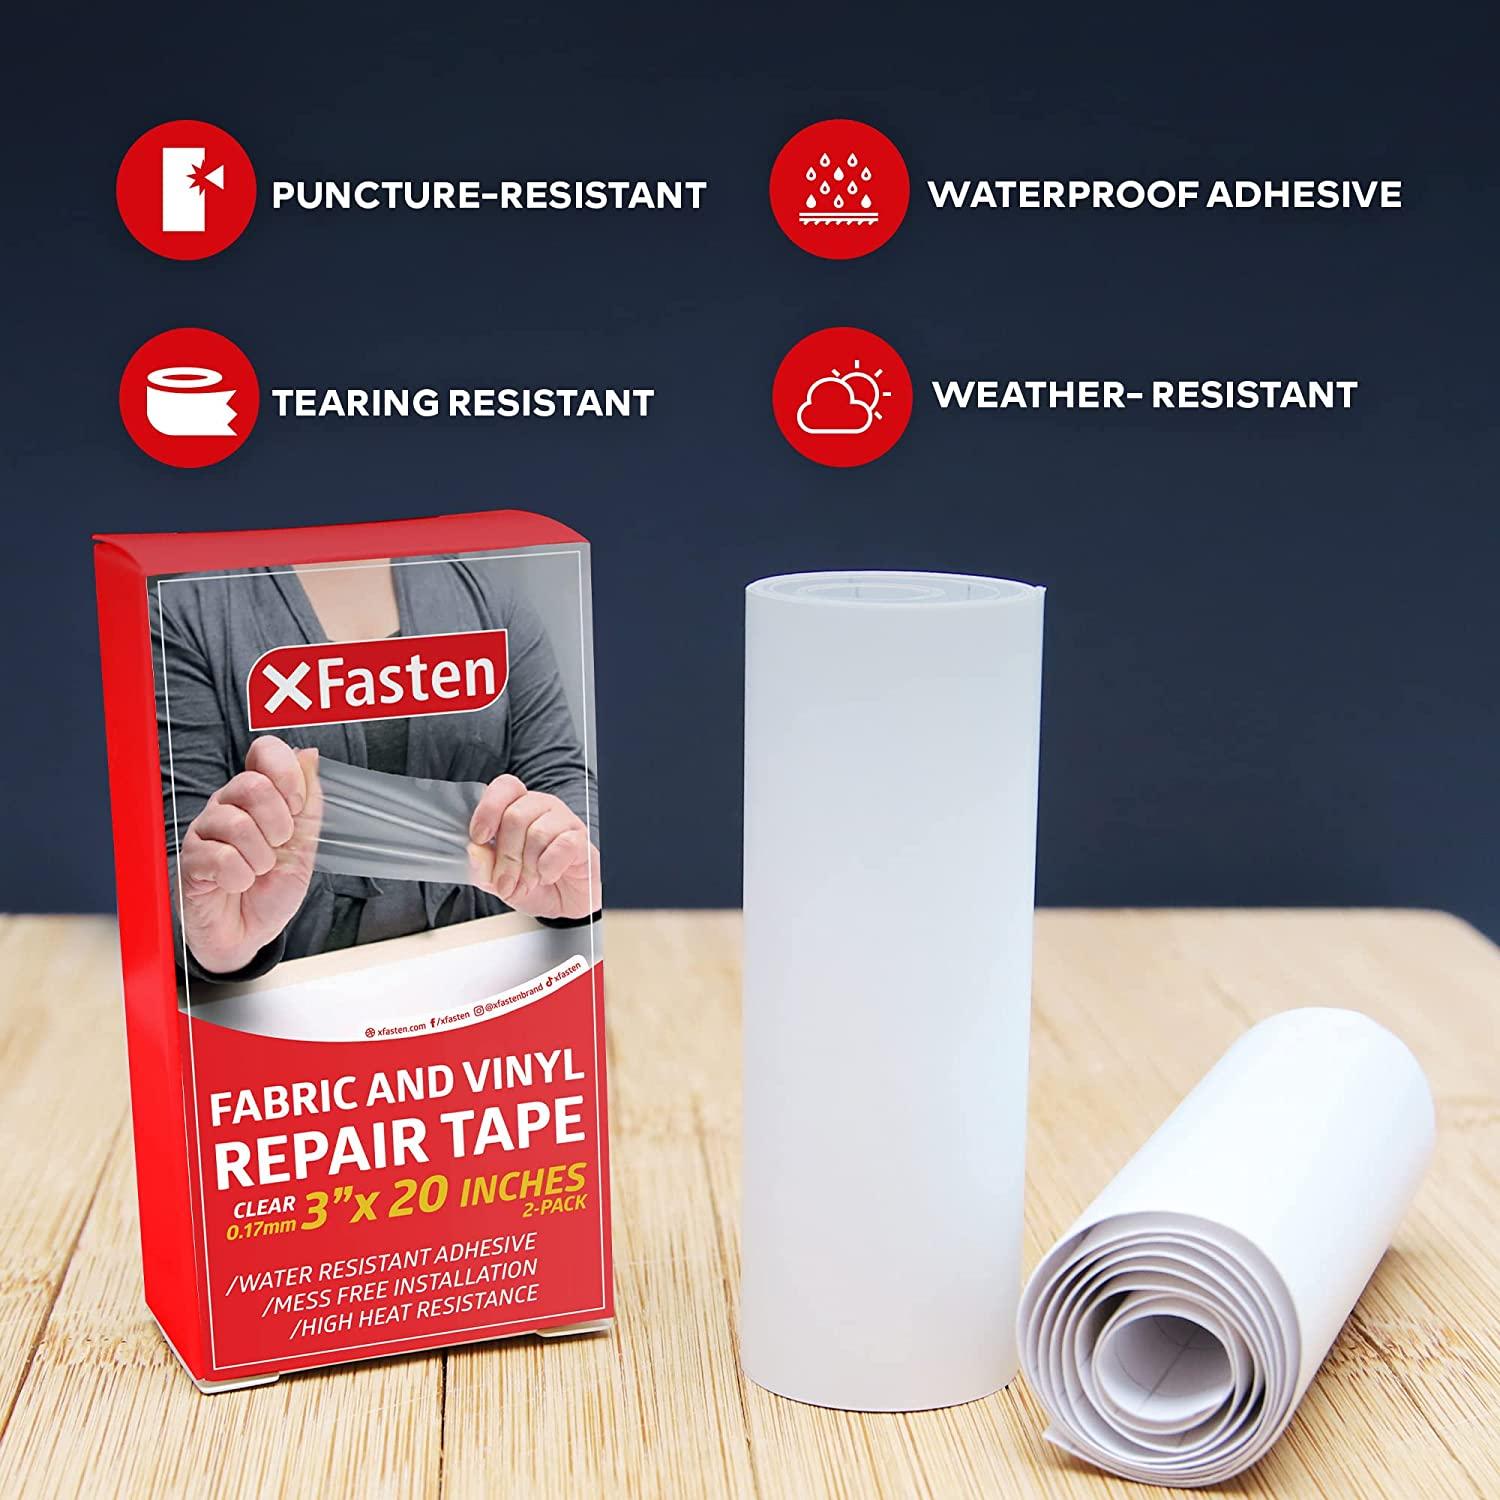 XFasten Double Sided Tape, Removable, 3/4-Inch by 20-Yards, Pack of 3